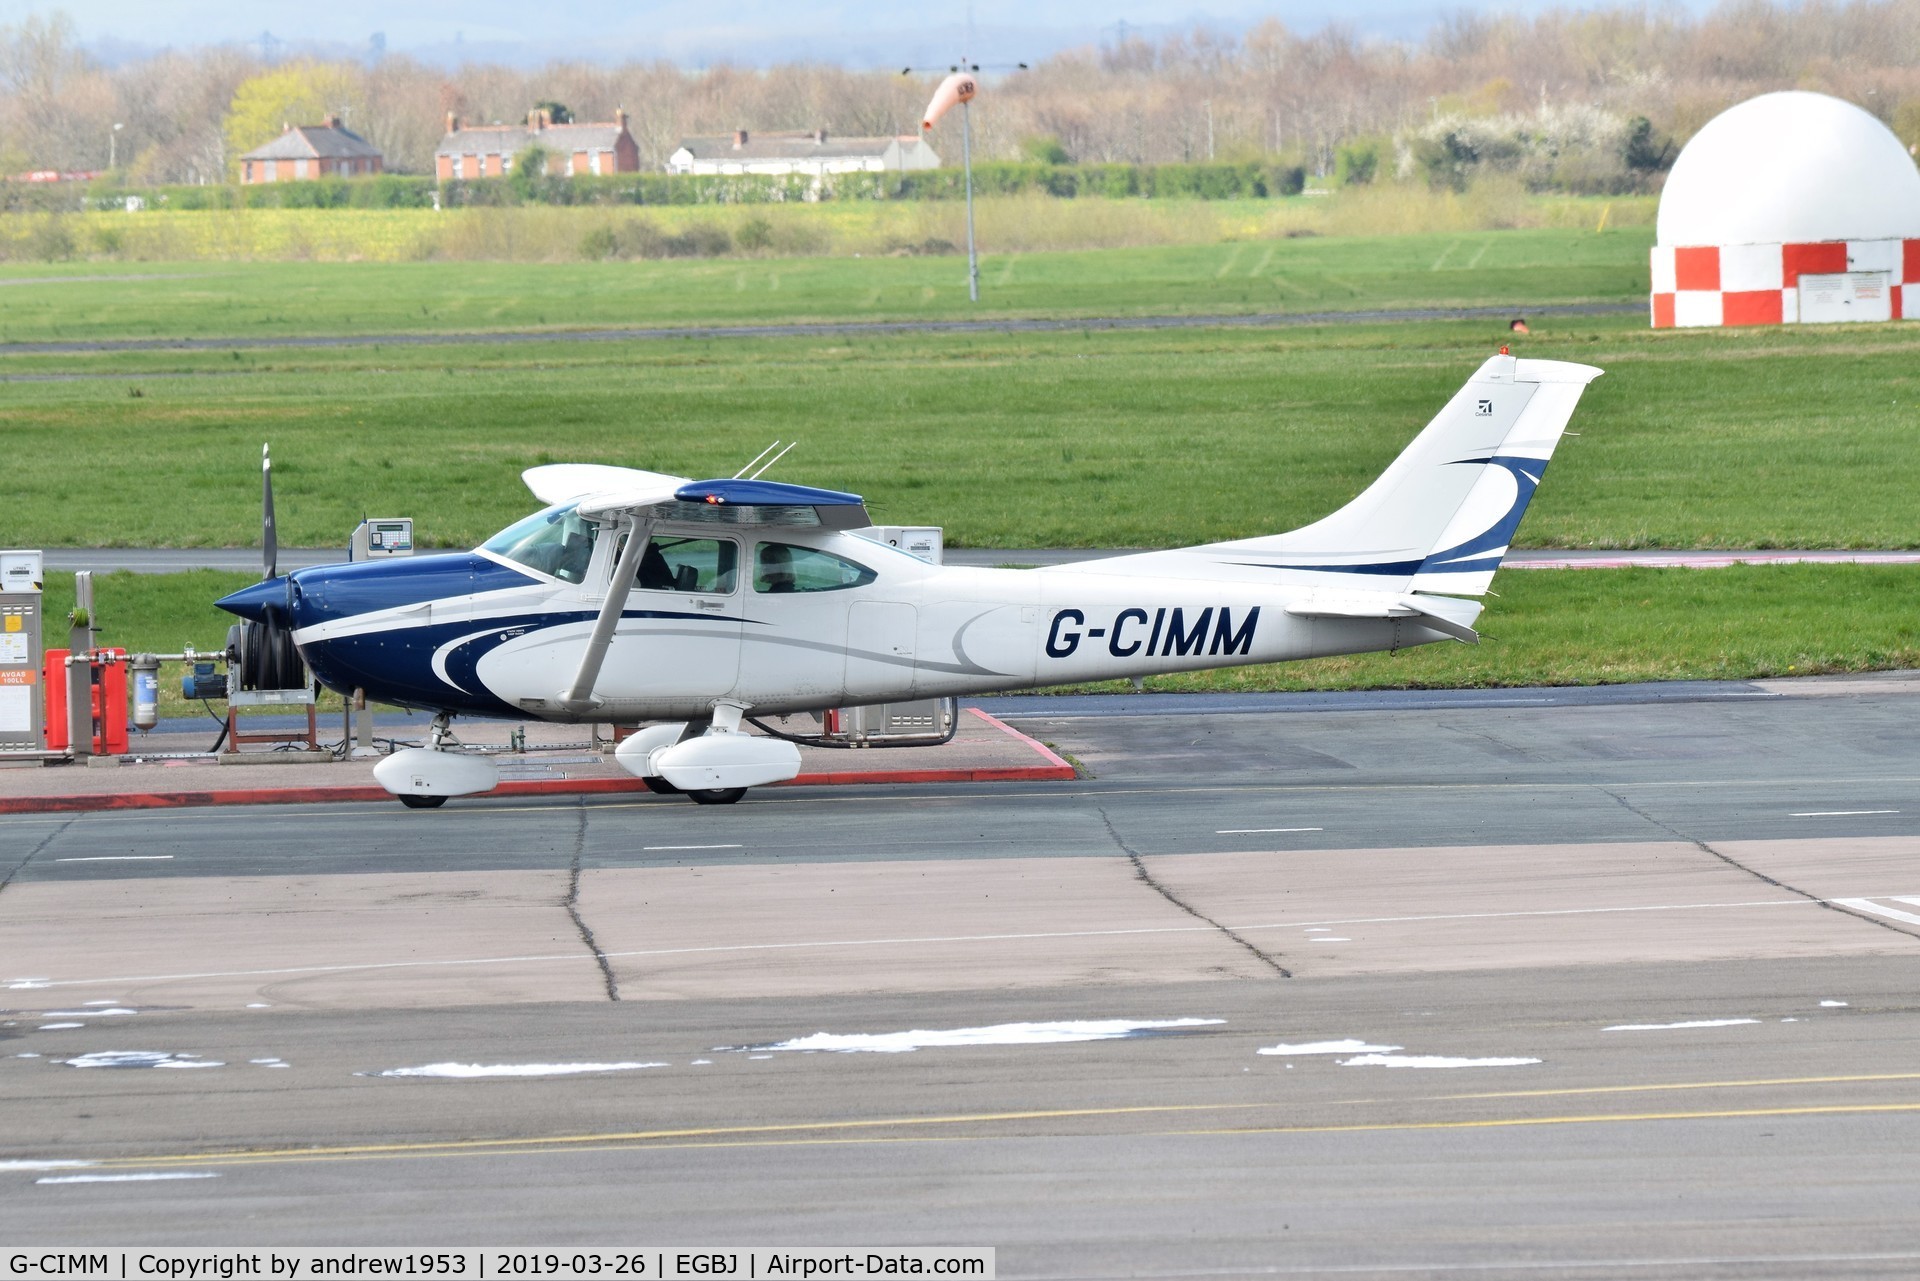 G-CIMM, 1975 Cessna 172M C/N 17265628, G-CIMM at Gloucestershire Airport.